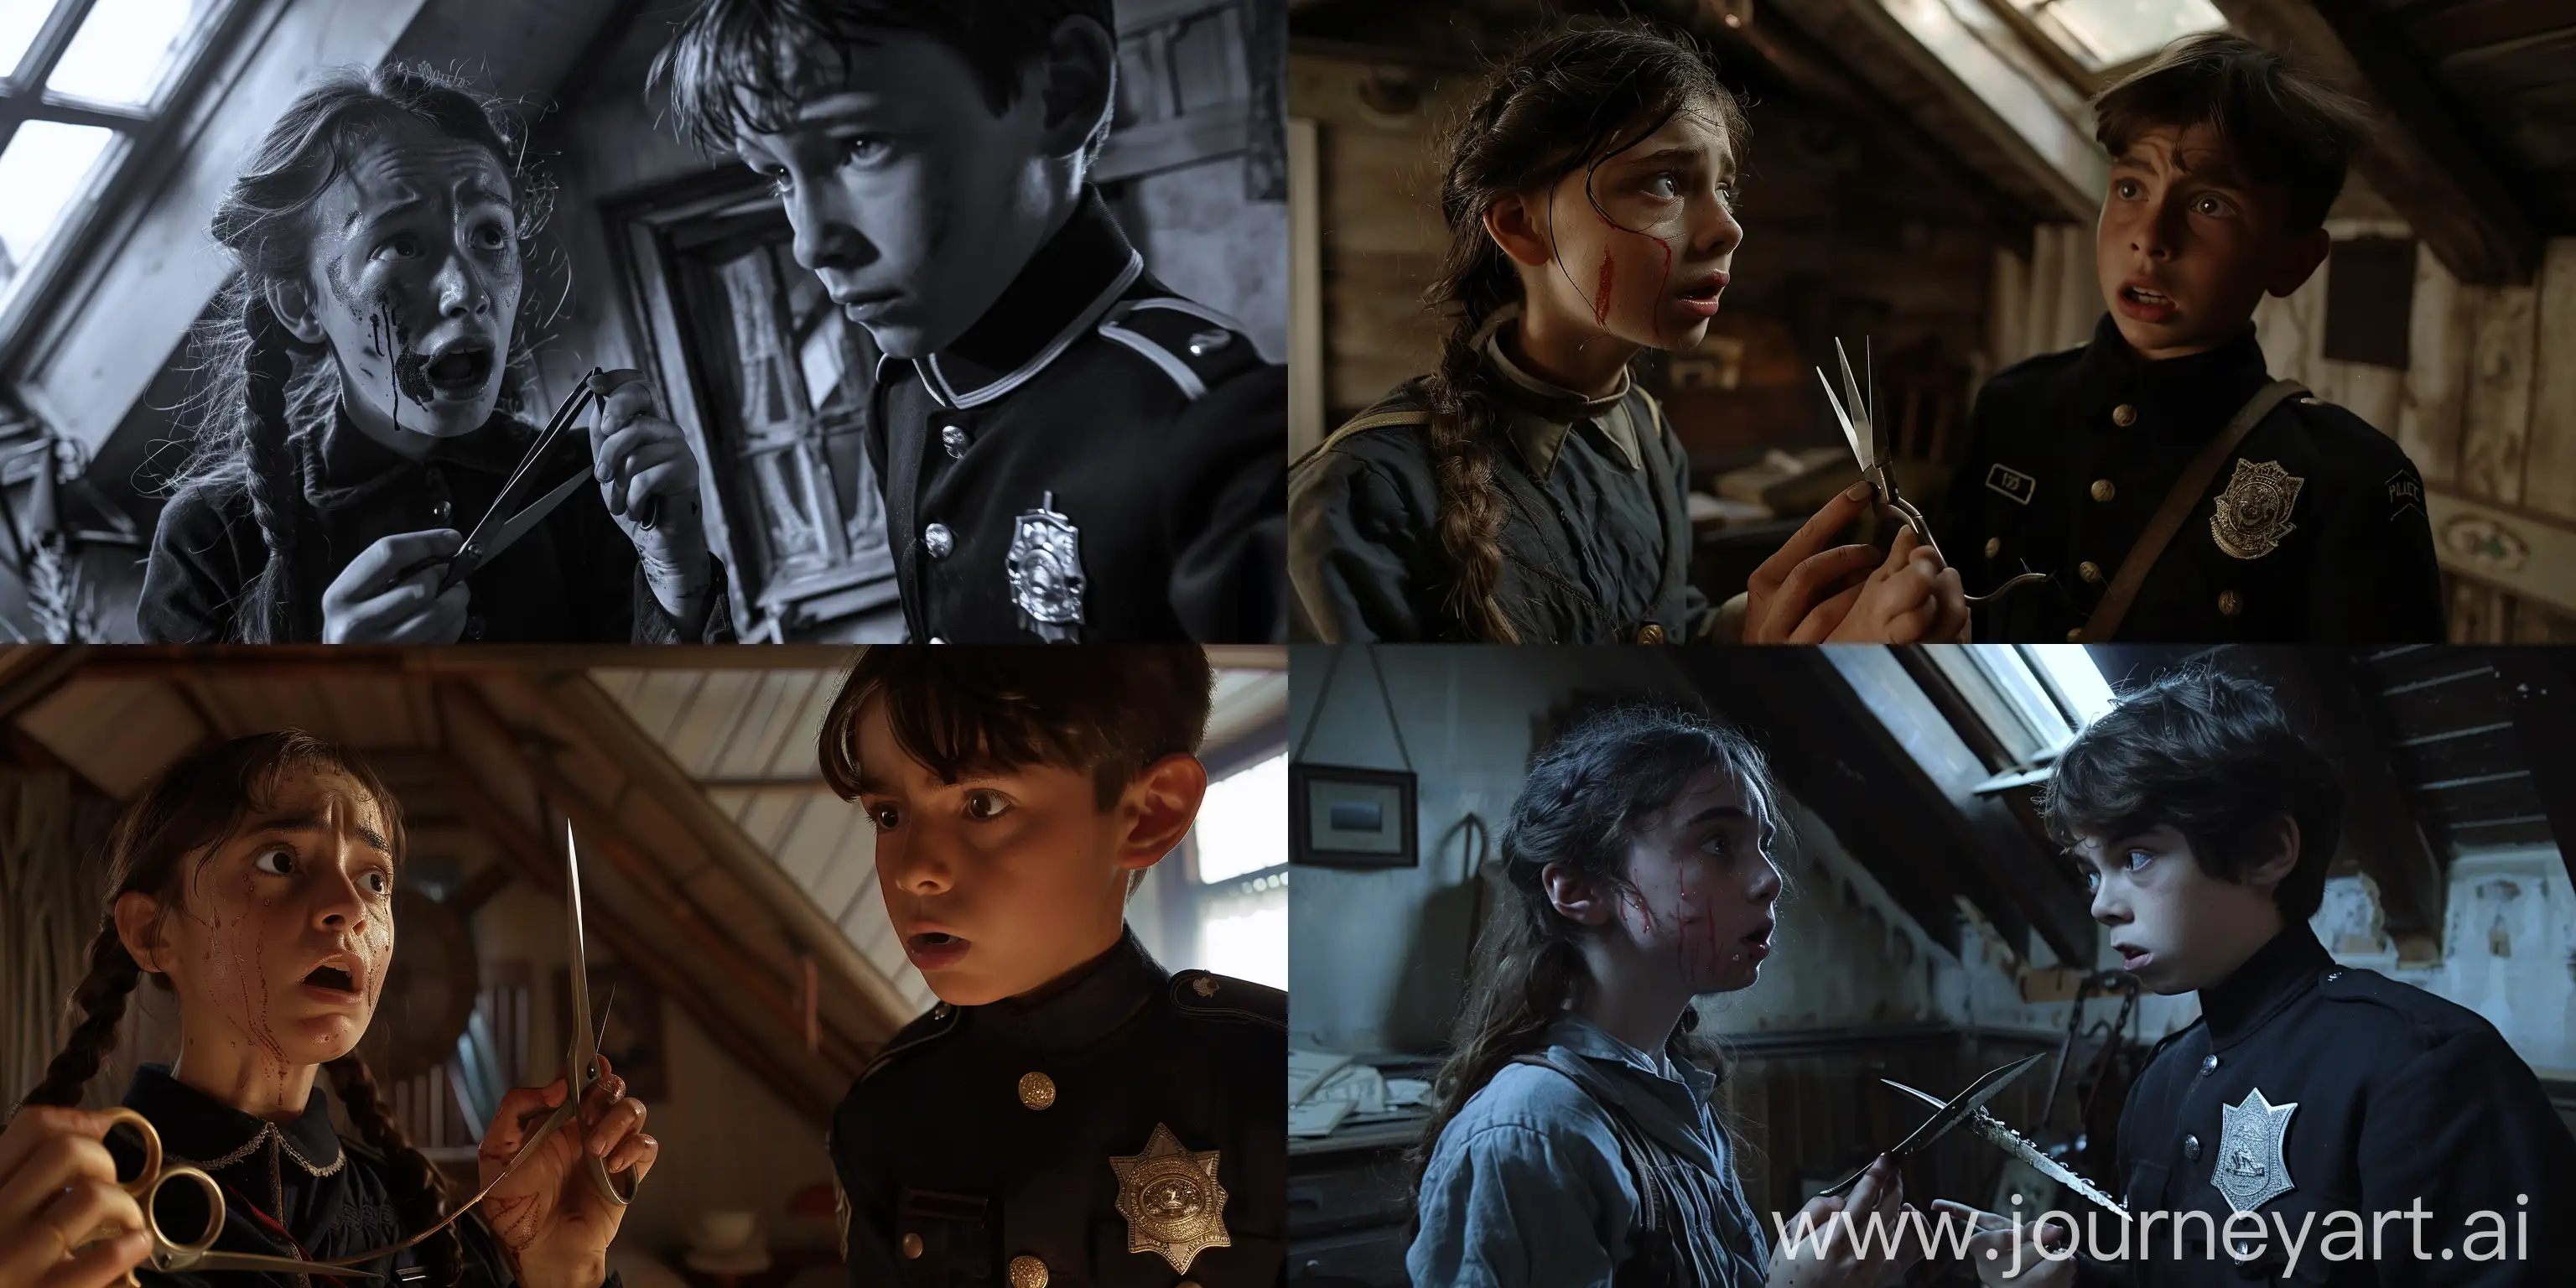 A 15-year-old girl holds sharp scissors in her hands and with tear-stained and shocked eyes looks at a 14-year-old boy in a police uniform who is trying to attack her, 19th century, room with access to the roof, shot by Canon R5C --ar 2:1 --style raw 